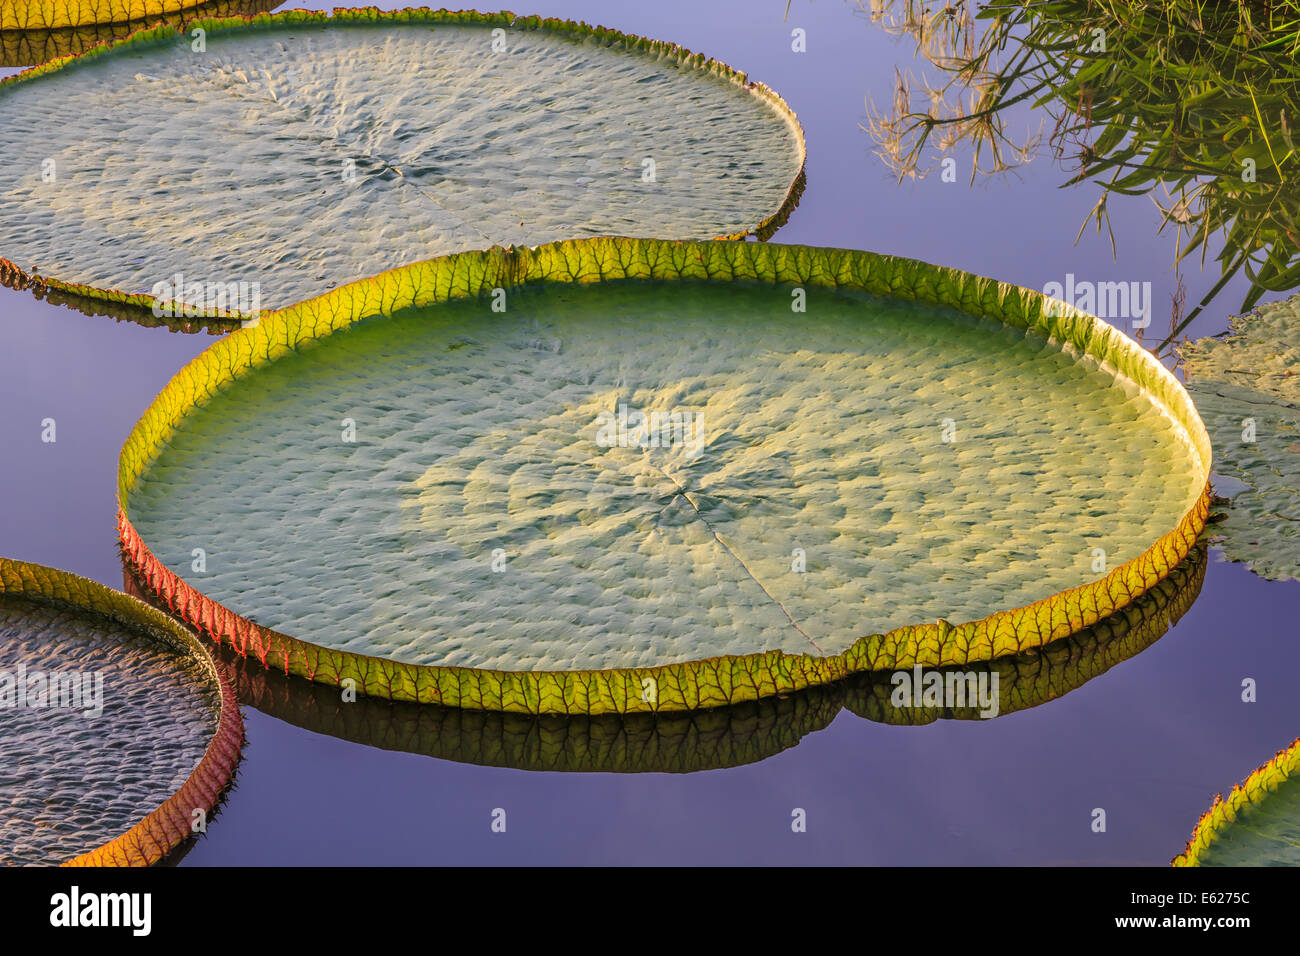 Big and round victoria lotus or water lily in the reflection pond Stock Photo